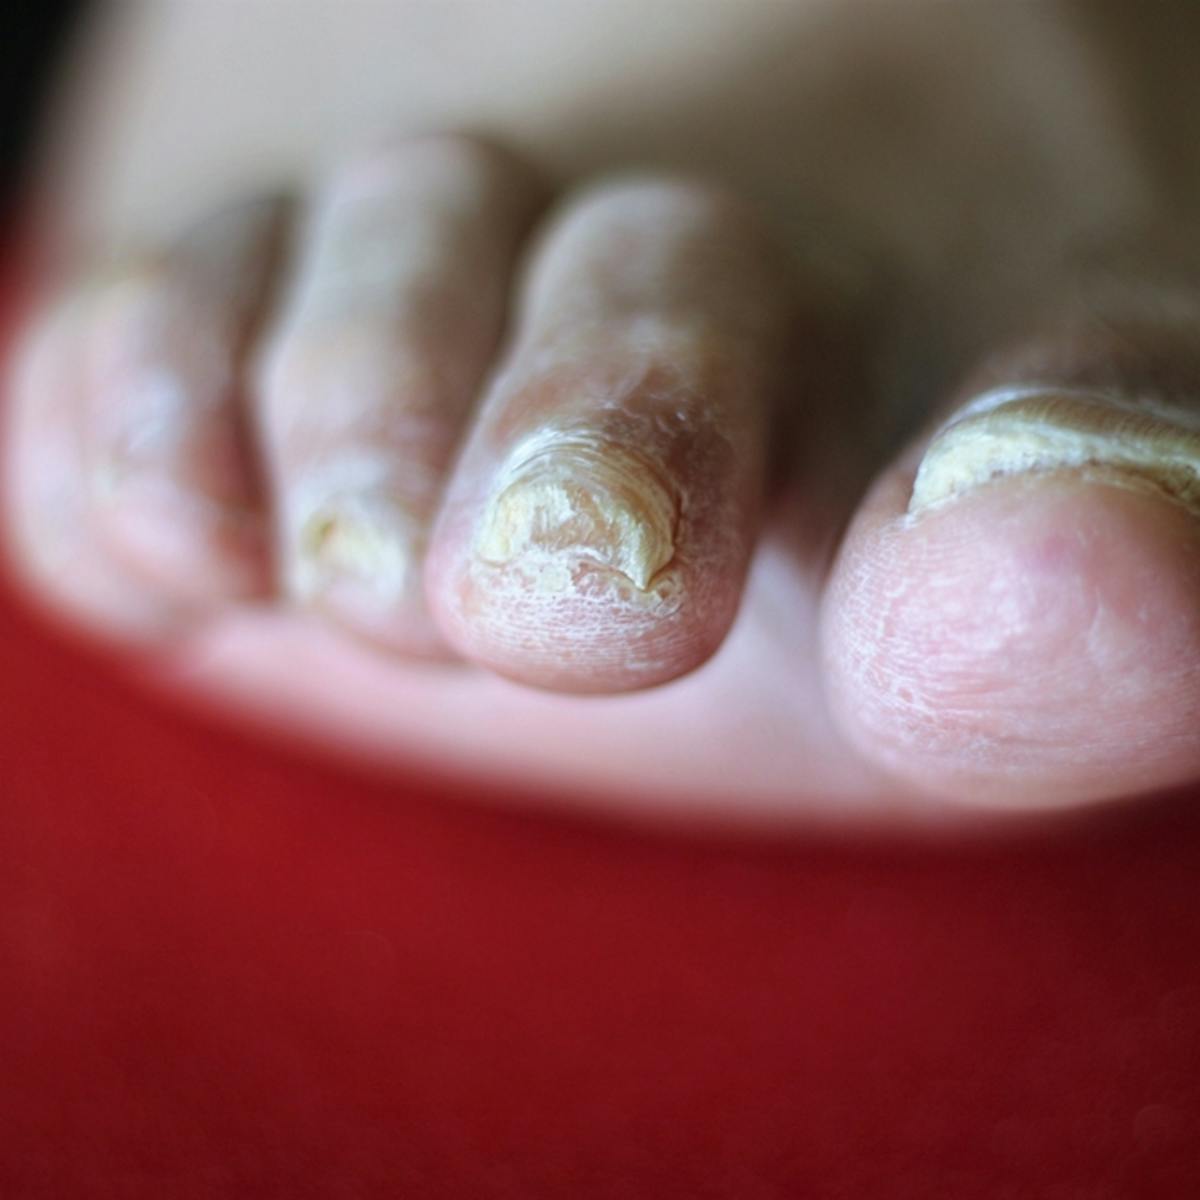 Latest Information About Best Fungal Nail Treatment Uk